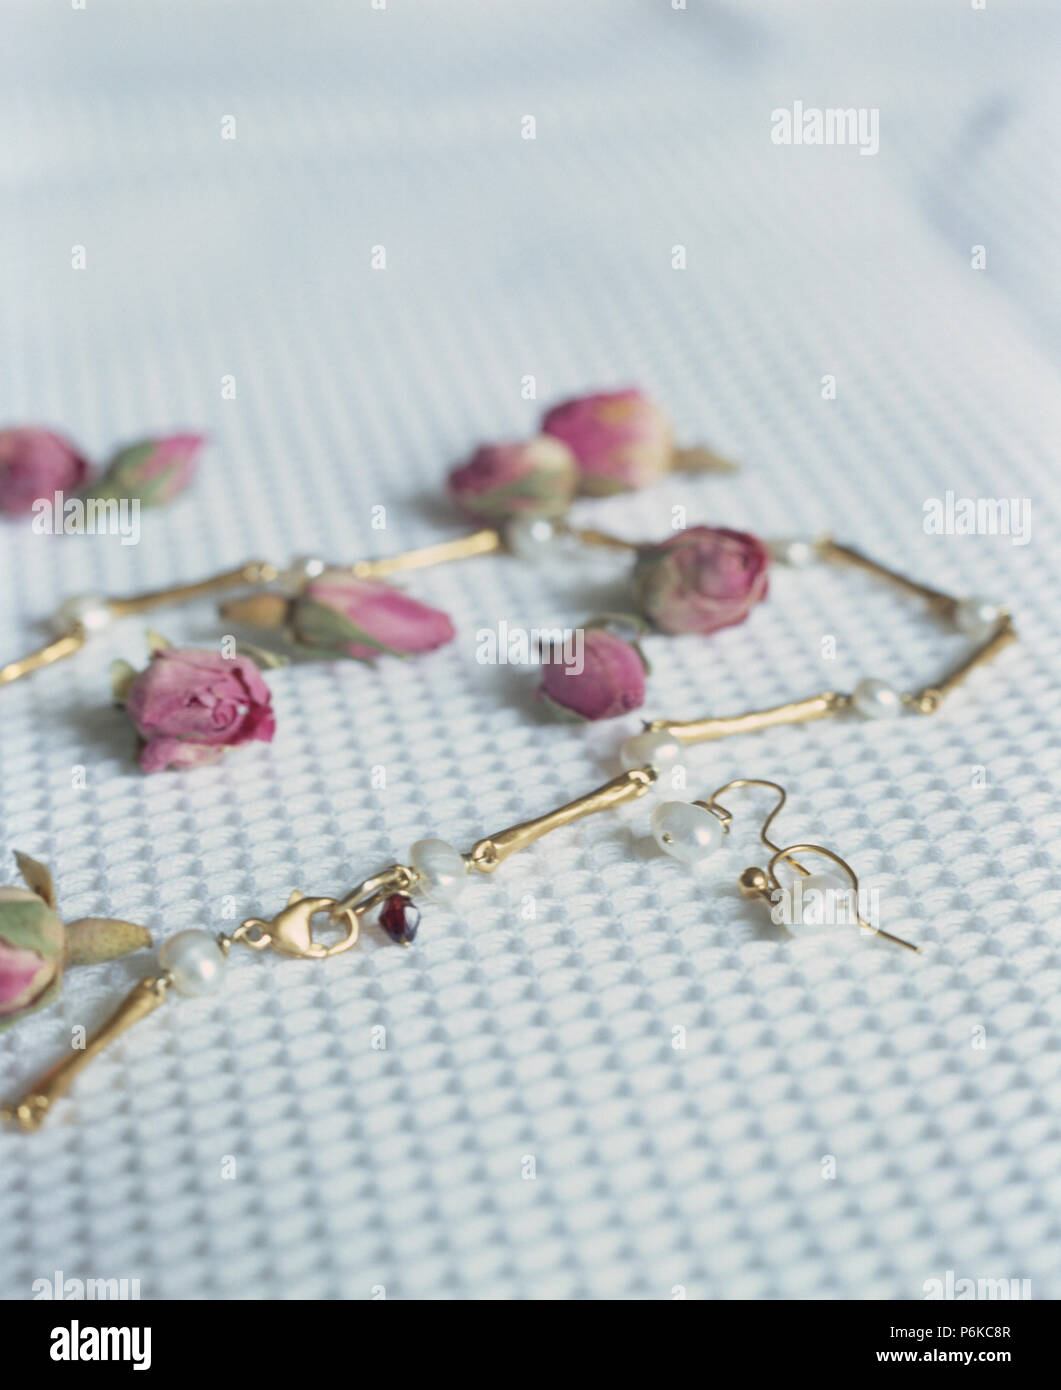 Close-up of silver necklace and ear rings with dried pink rosebuds Stock Photo